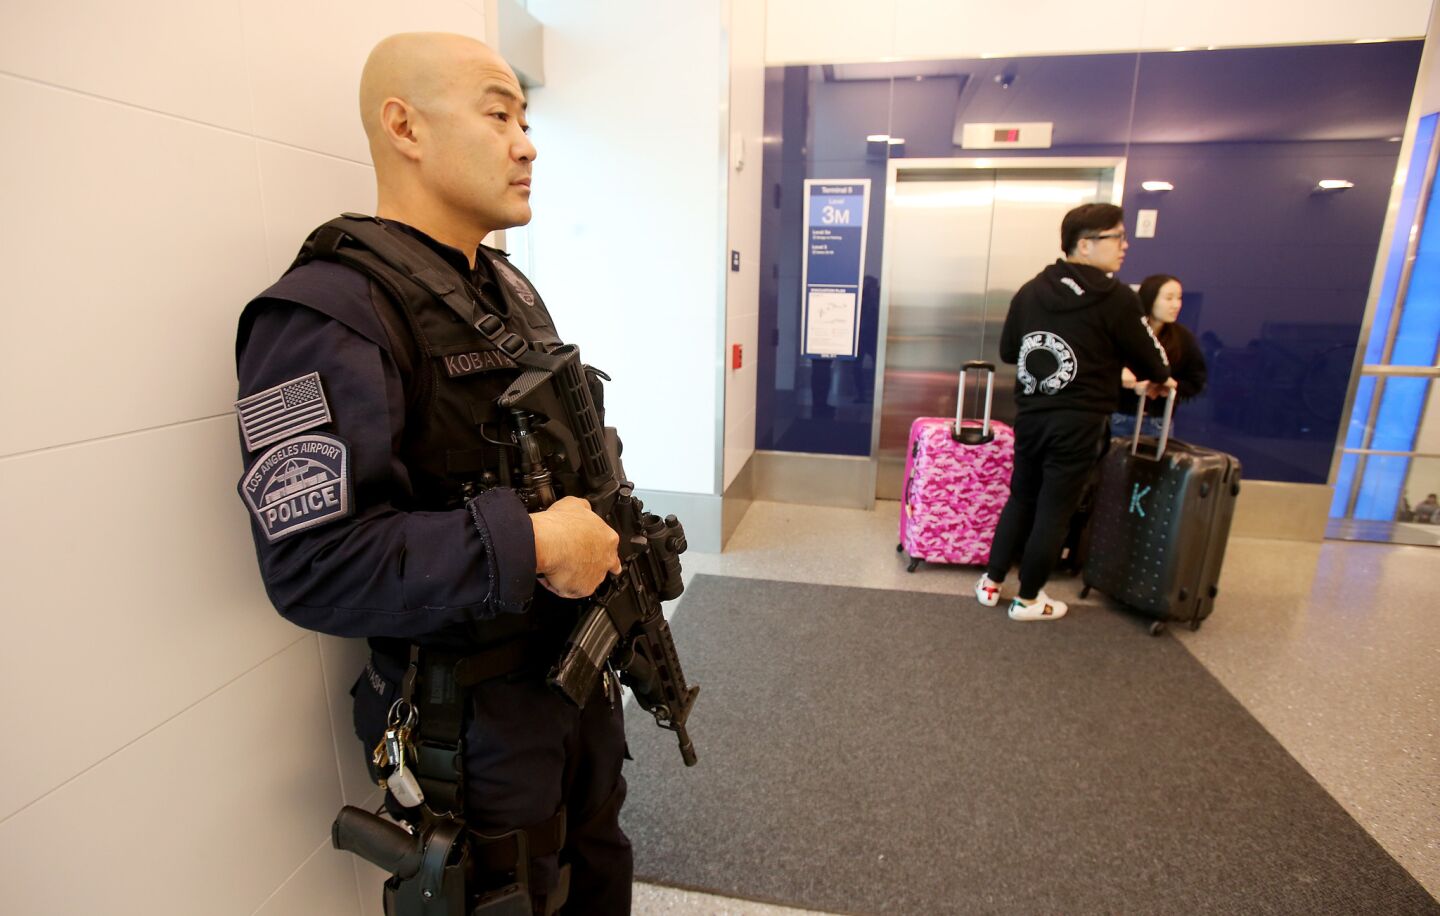 A heavily armed police officer stands guard at Los Angeles International Airport, where security personnel responded to the discovery of several suspicious paackages on Wednesday.